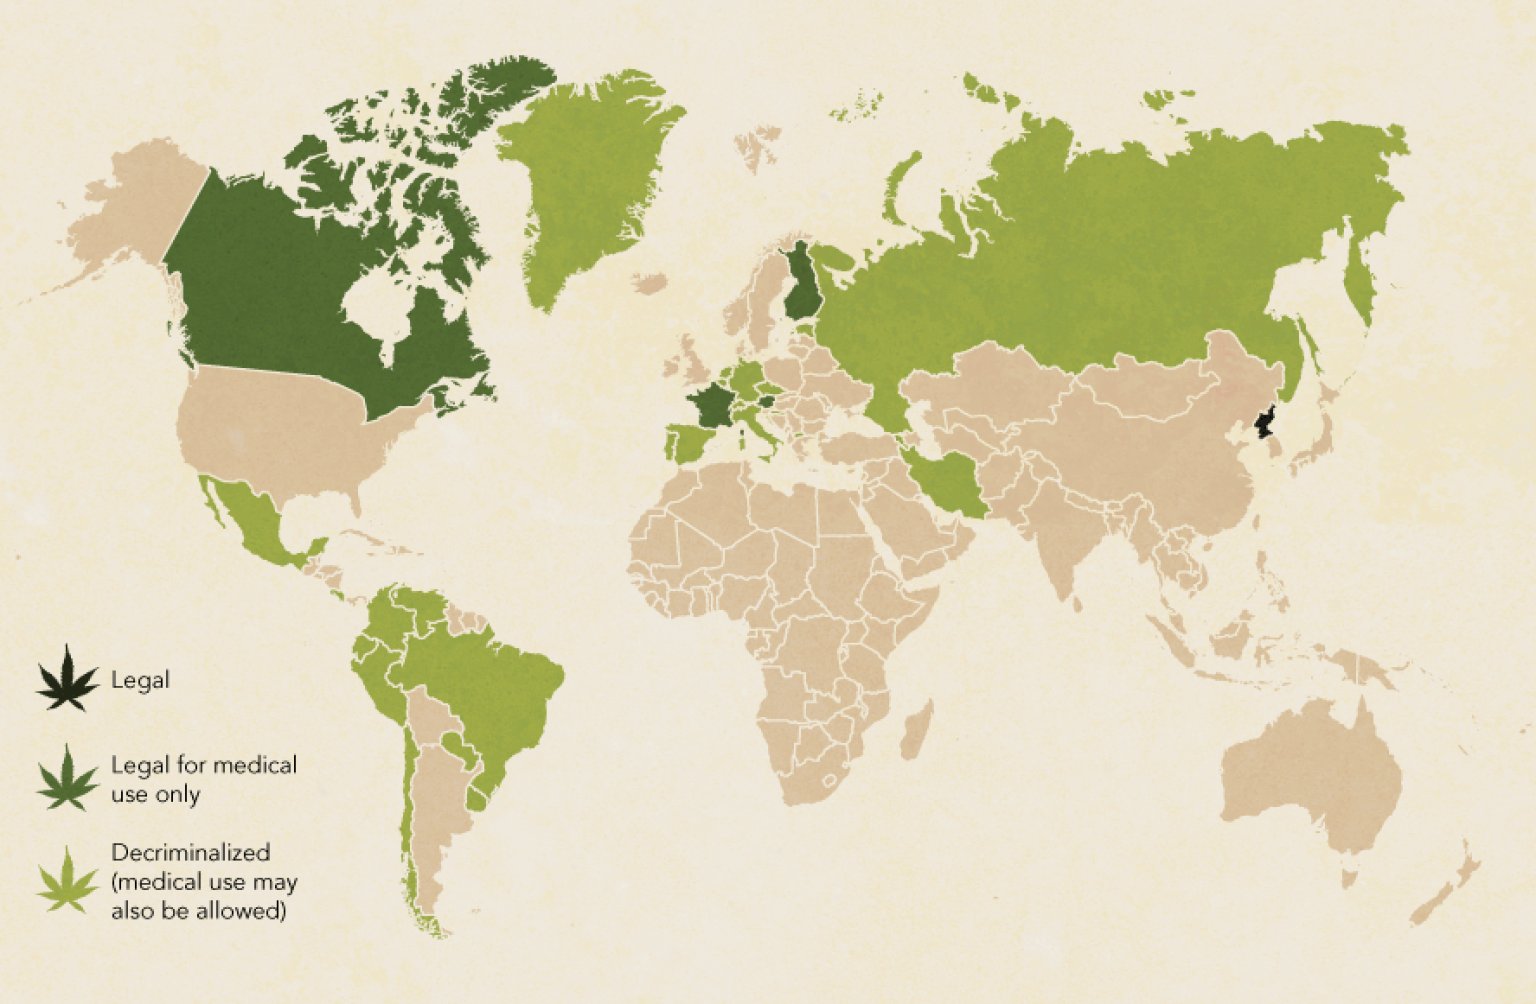 The World's Most MarijuanaFriendly Countries (INFOGRAPHIC)